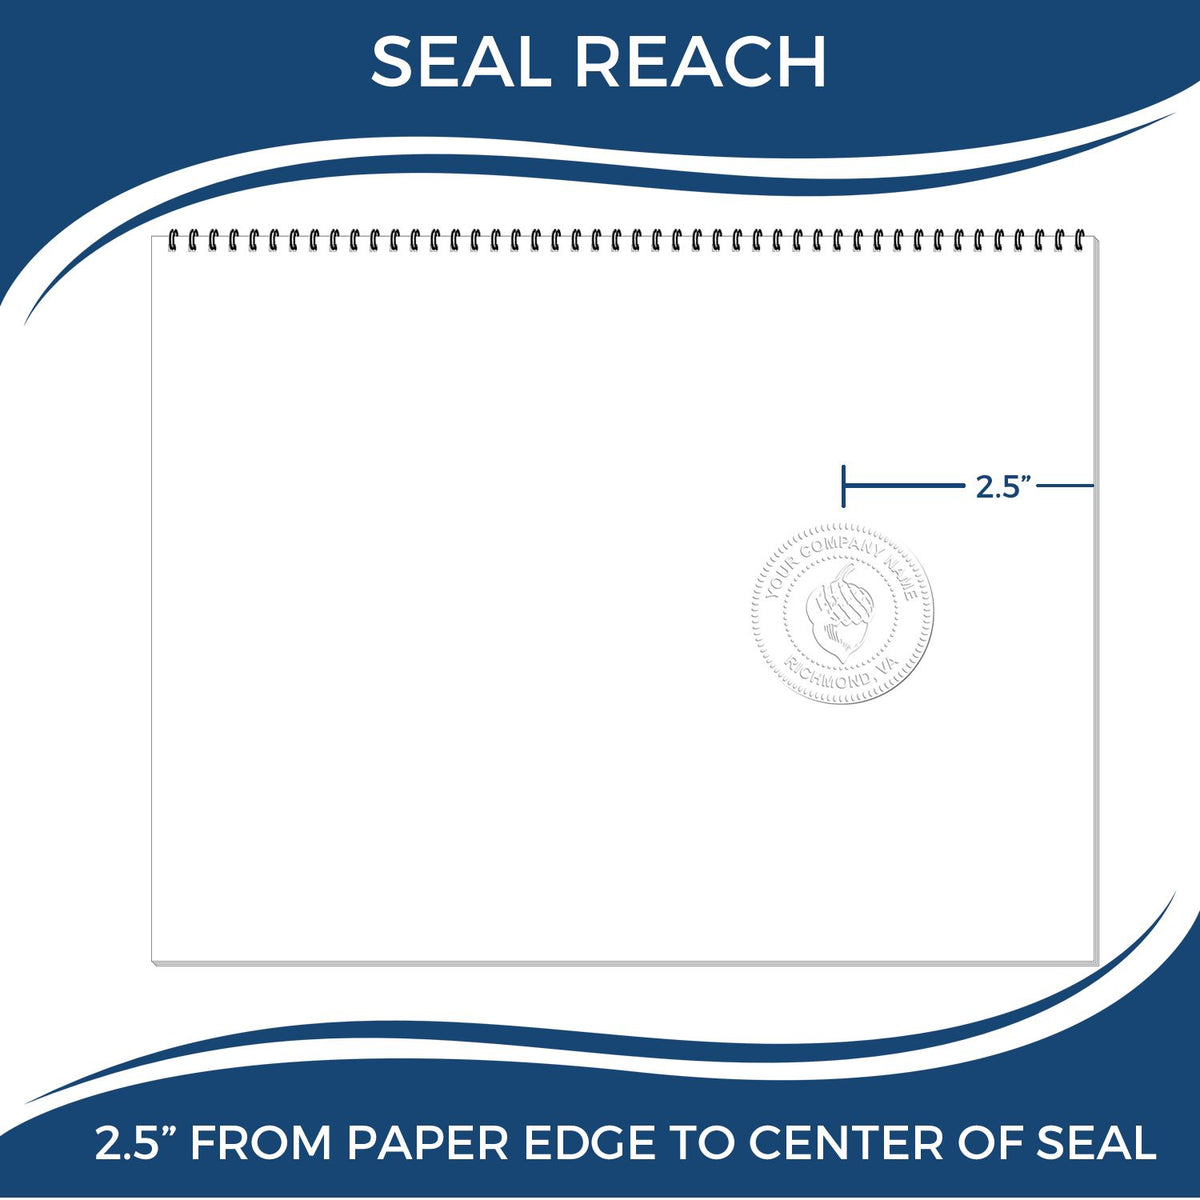 An infographic showing the seal reach which is represented by a ruler and a miniature seal image of the Long Reach Kansas PE Seal